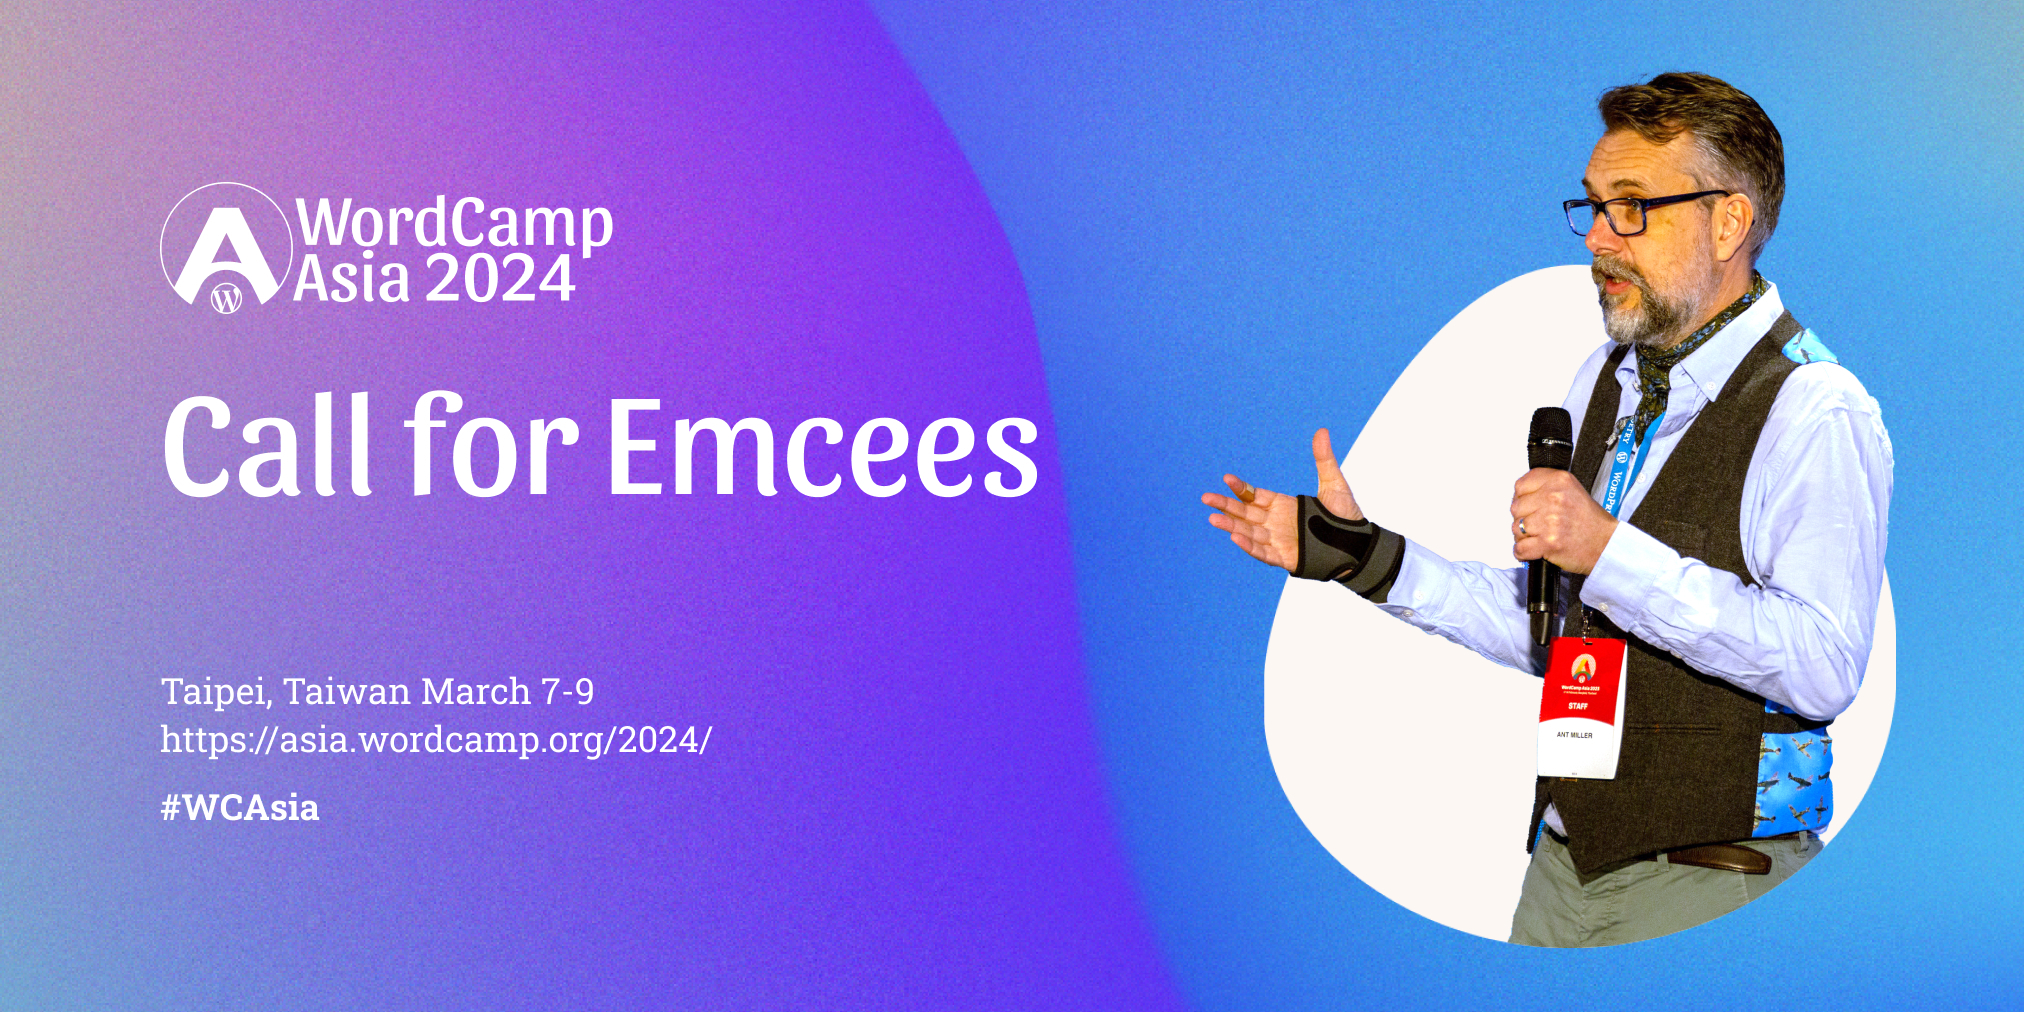 Emcee Applications for WordCamp Asia 2024 is now open